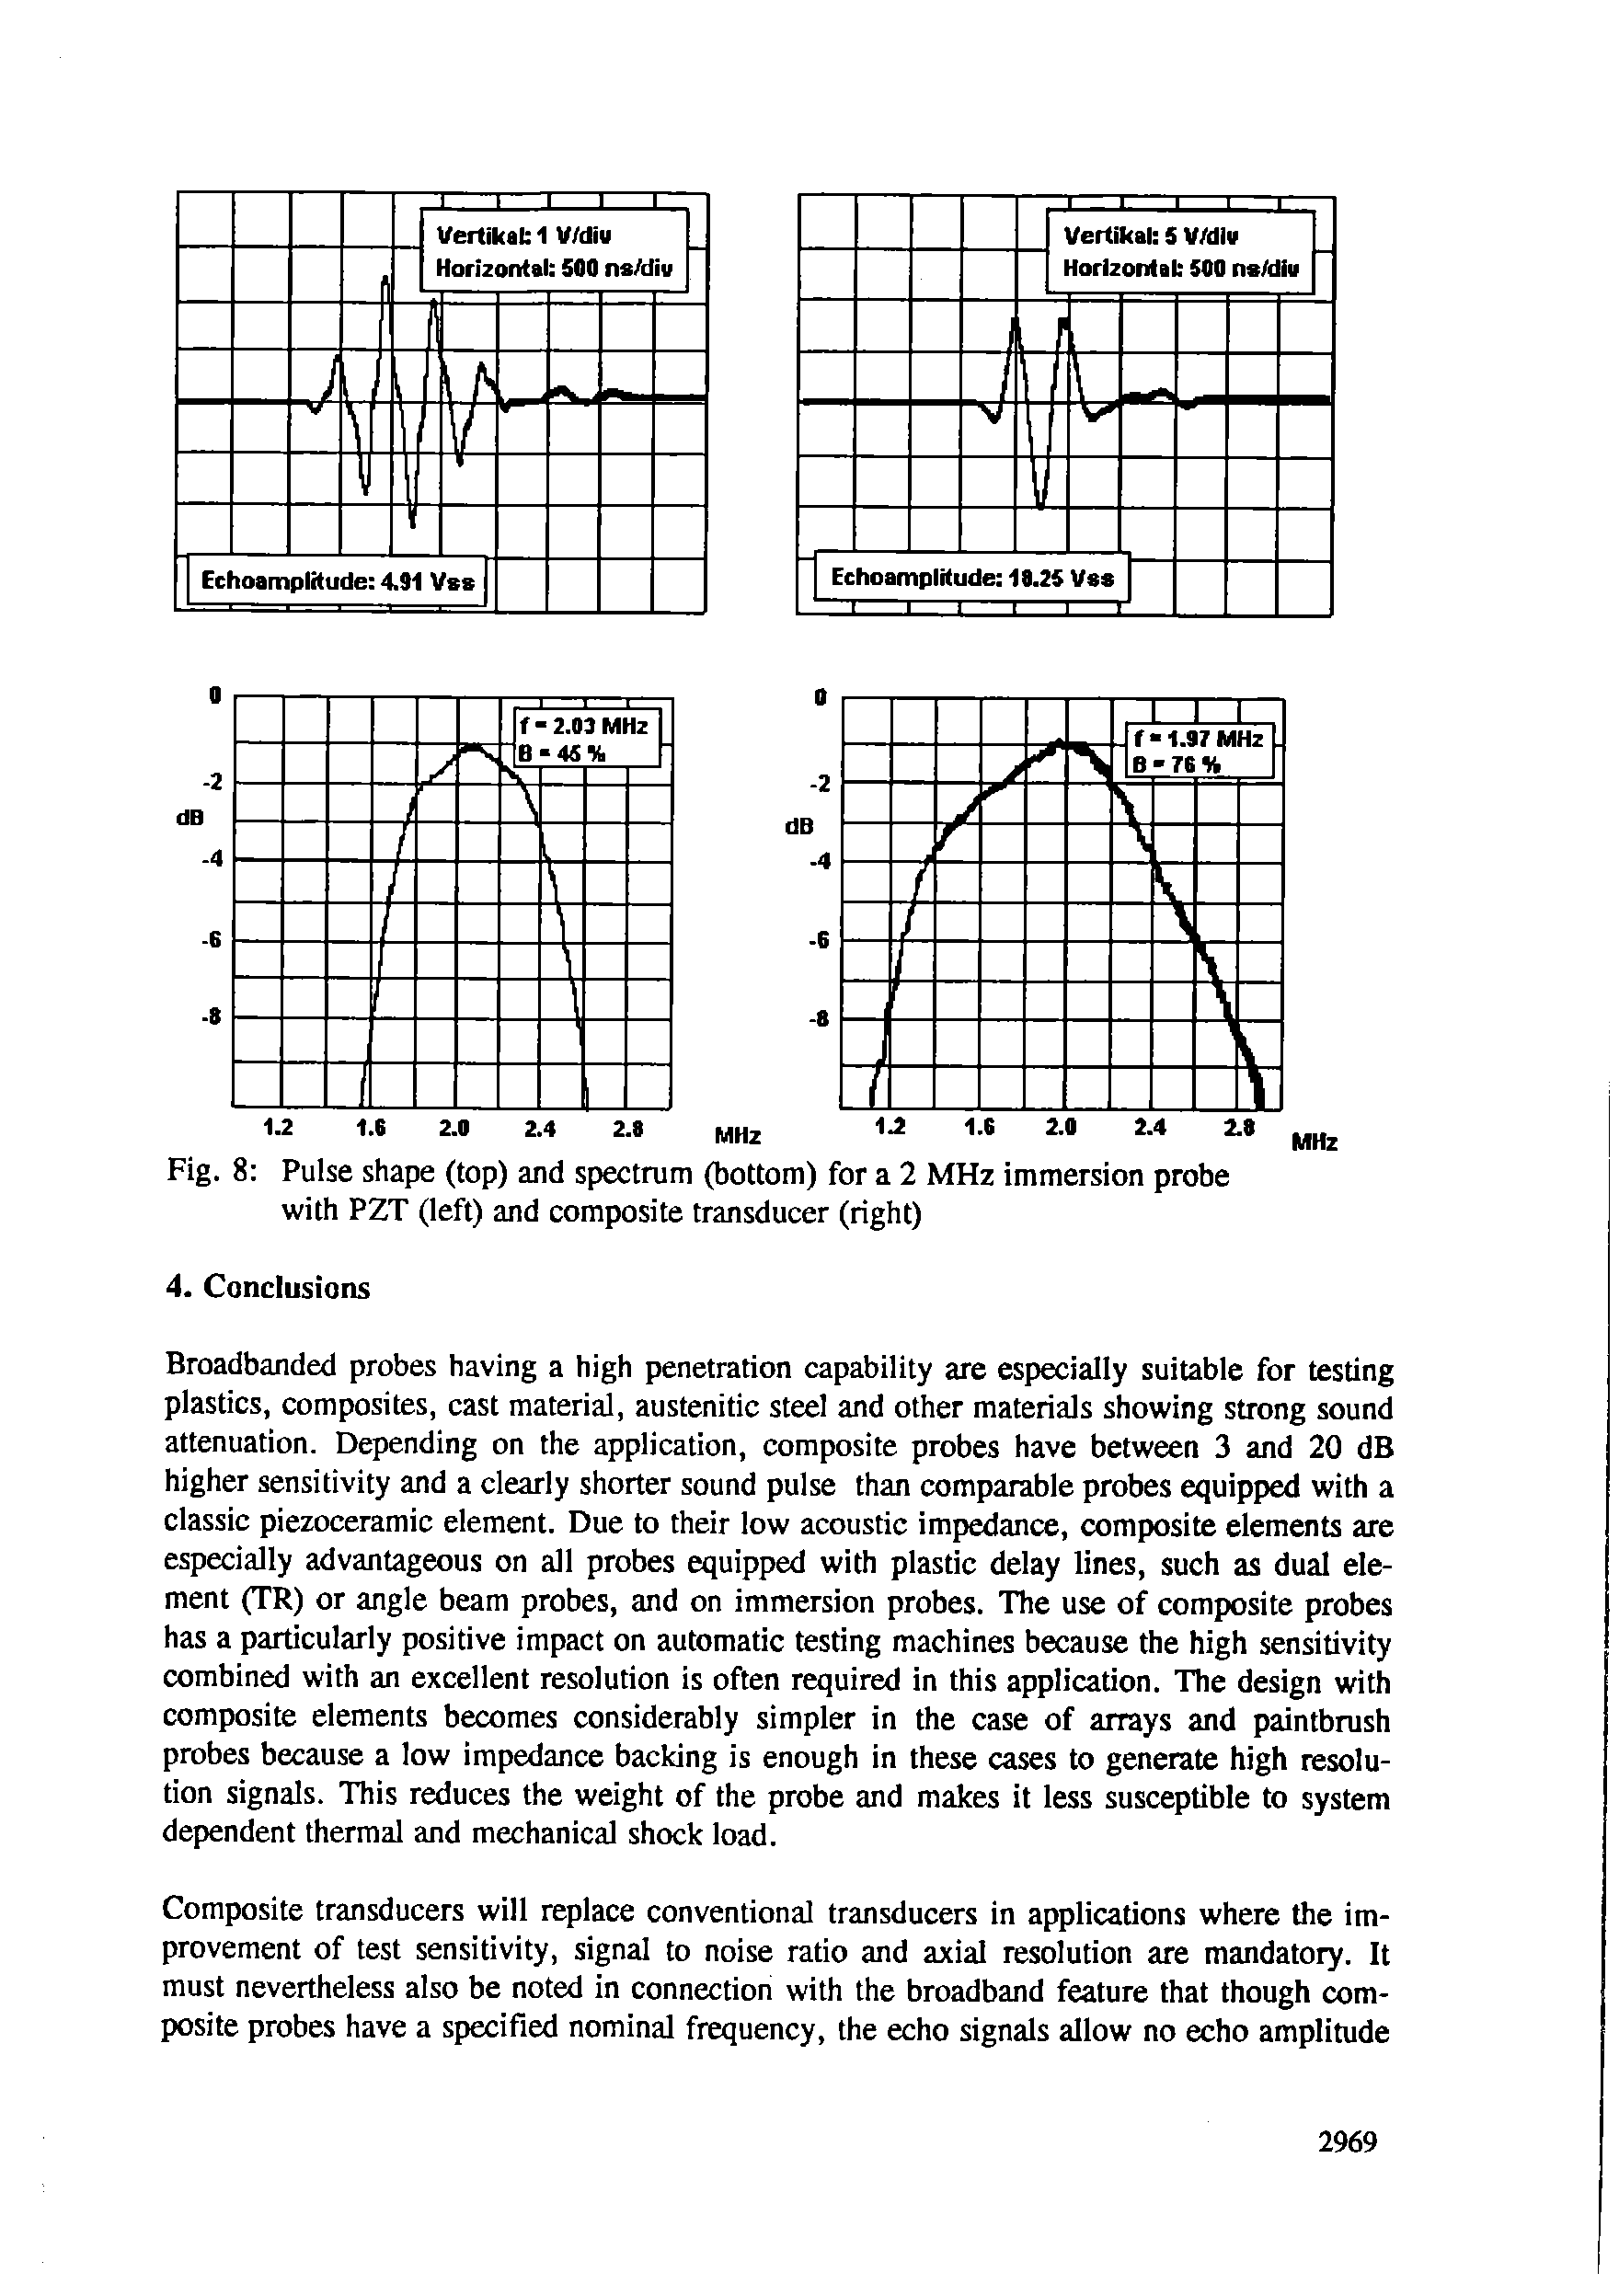 Fig. 8 Pulse shape (top) and spectrum (bottom) for a 2 MHz immersion probe with PZT (left) and composite transducer (right)...